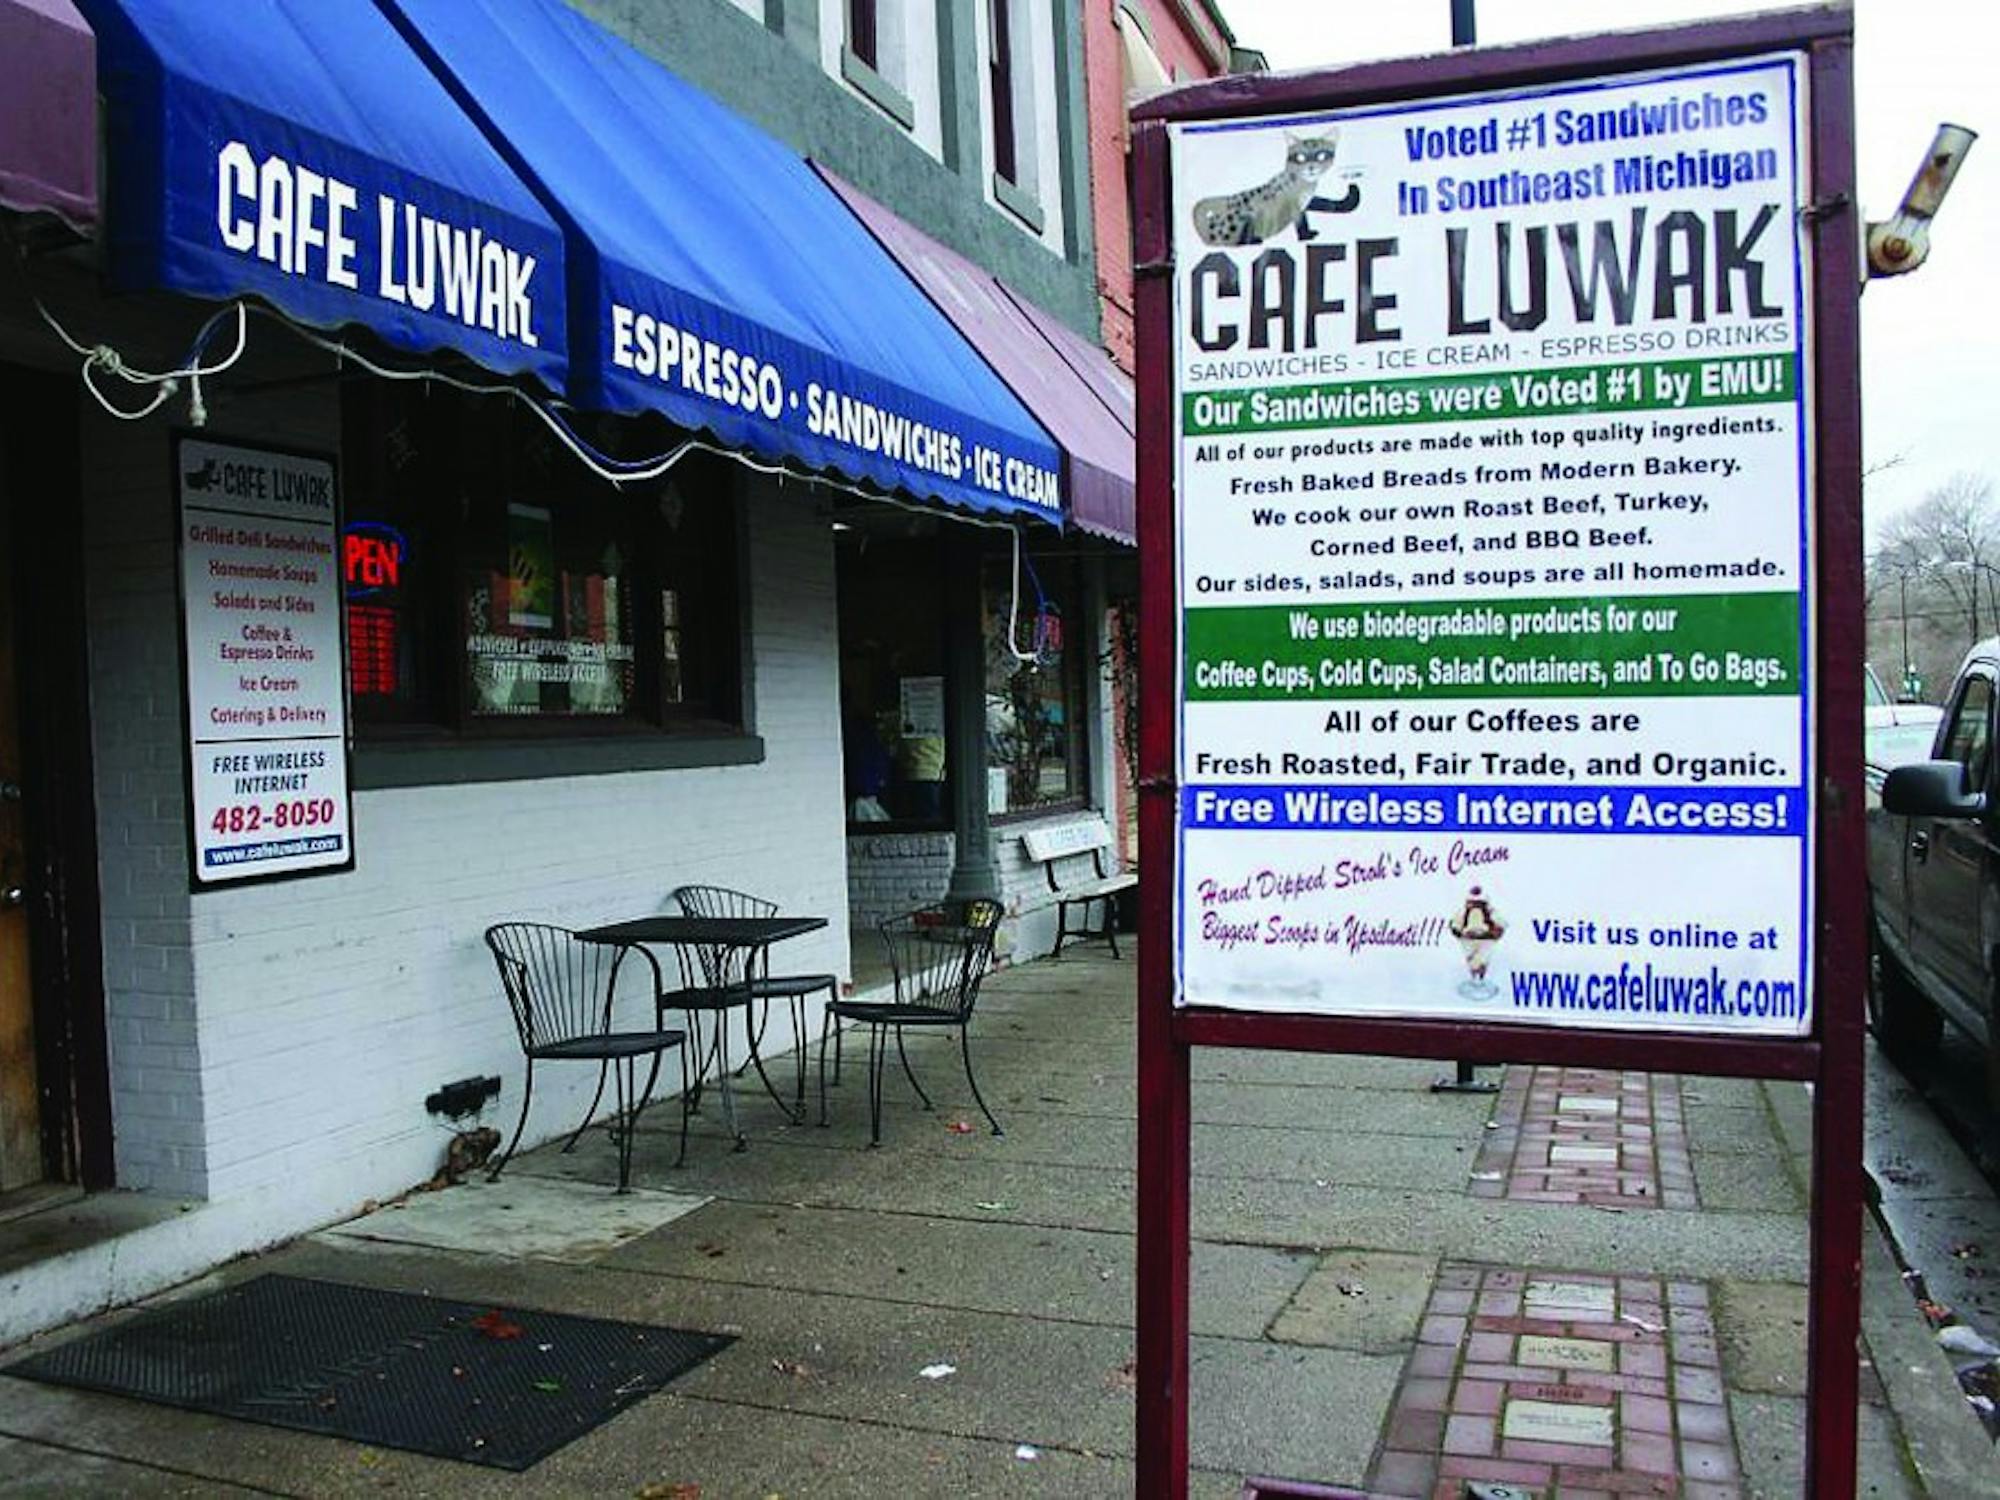 Cafe Luwak will stay open for another year while owner Jim Karnopp looks for a business partner to run the cafe.
